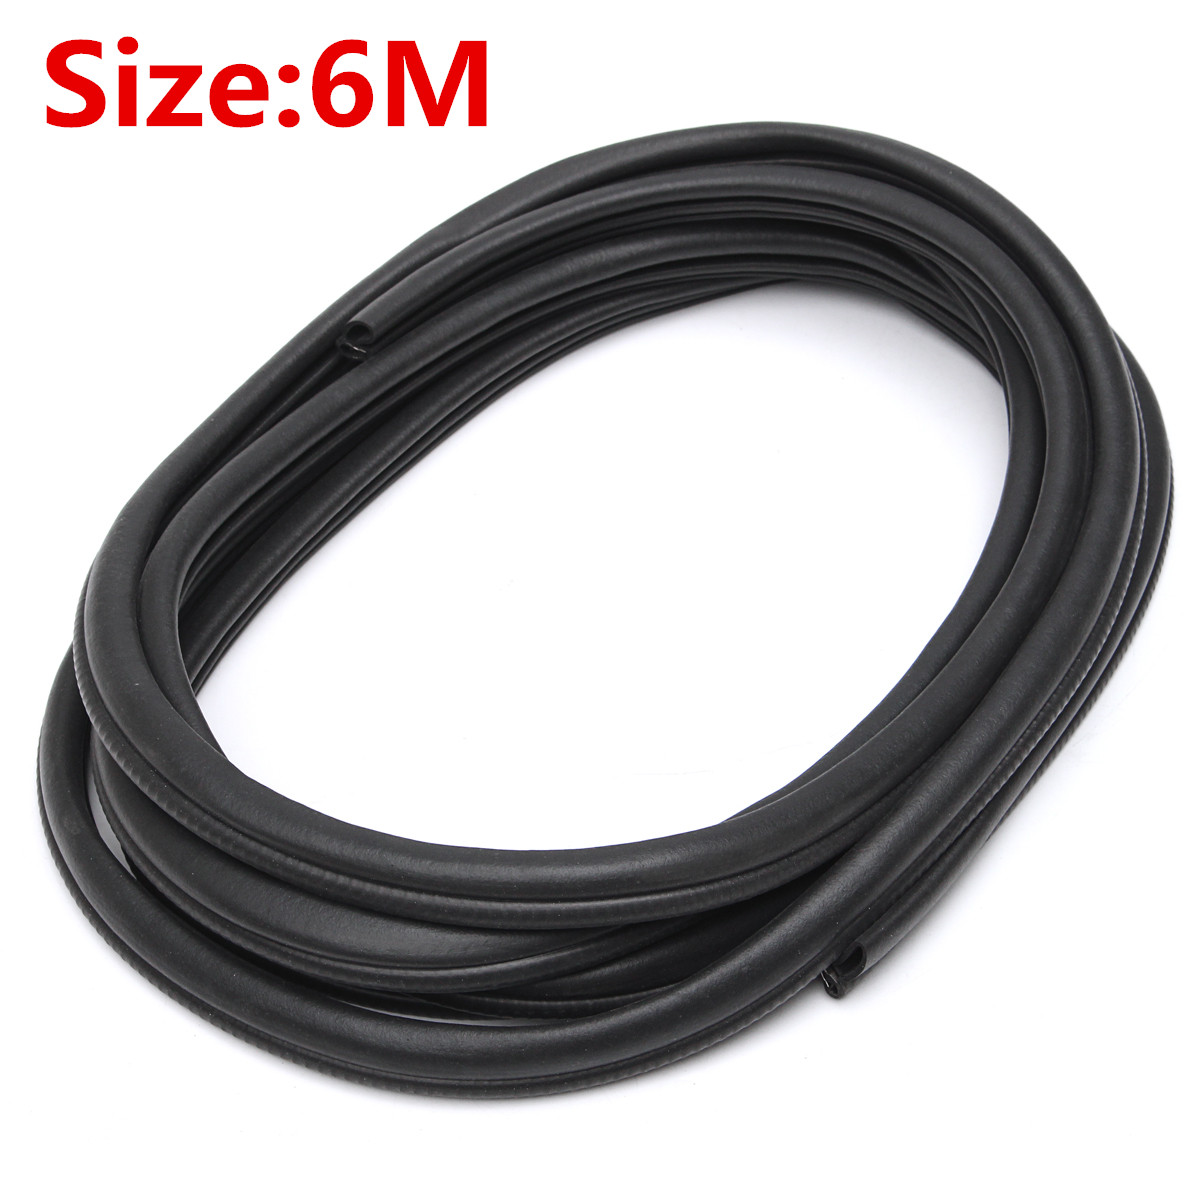 6M-Rubber-Seal-Ring-Strip-Protector-B-Type-for-Door-Window-Trunk-Edge-1161222-1